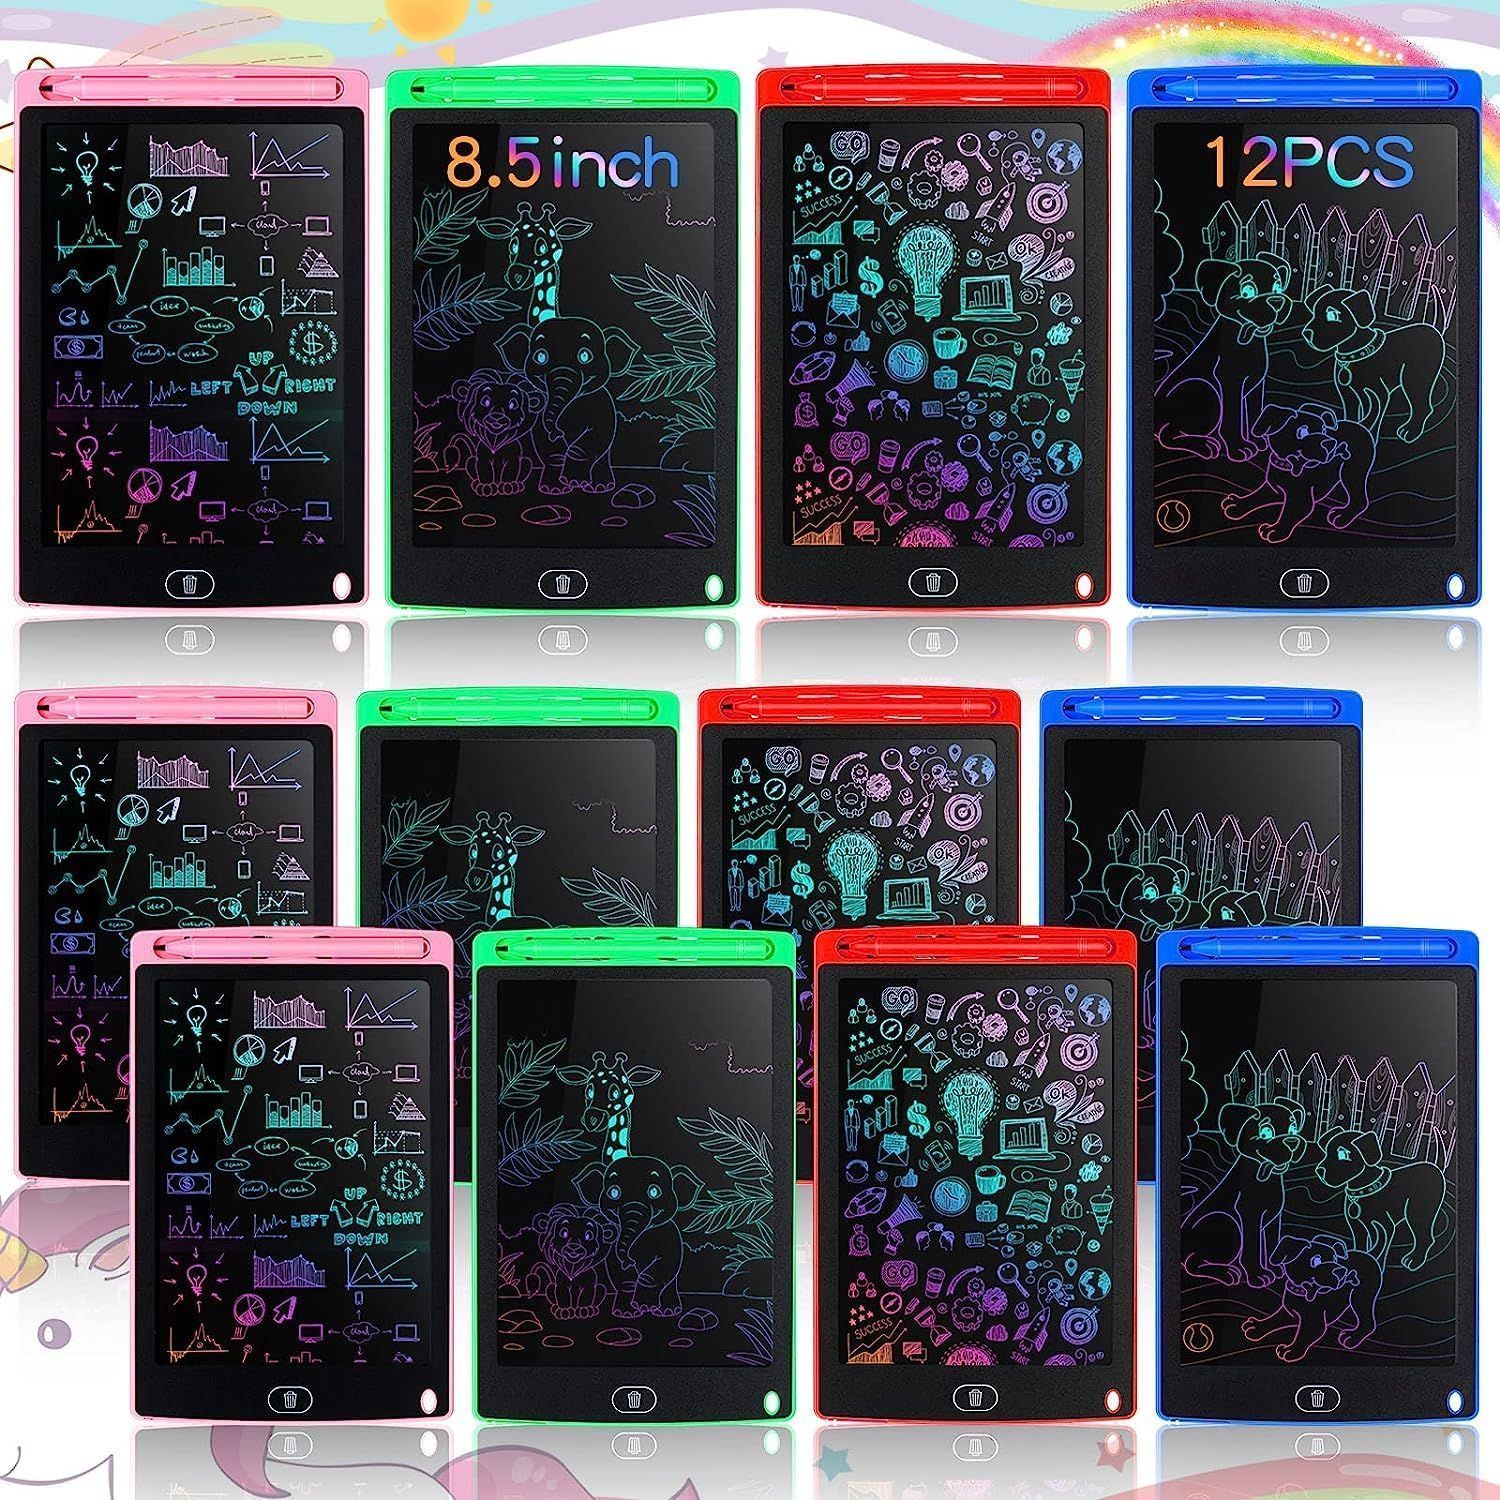 IVA COLLECTION12Pack LCD Writing Tablets 8.5 Inch Doodle Erasable Electronic Drawing Pads Reusable Painting Tablets Learning Toy Gifts for Boys Girls Birthday Return Gifts Combo Pack Stationary Set( black colour)